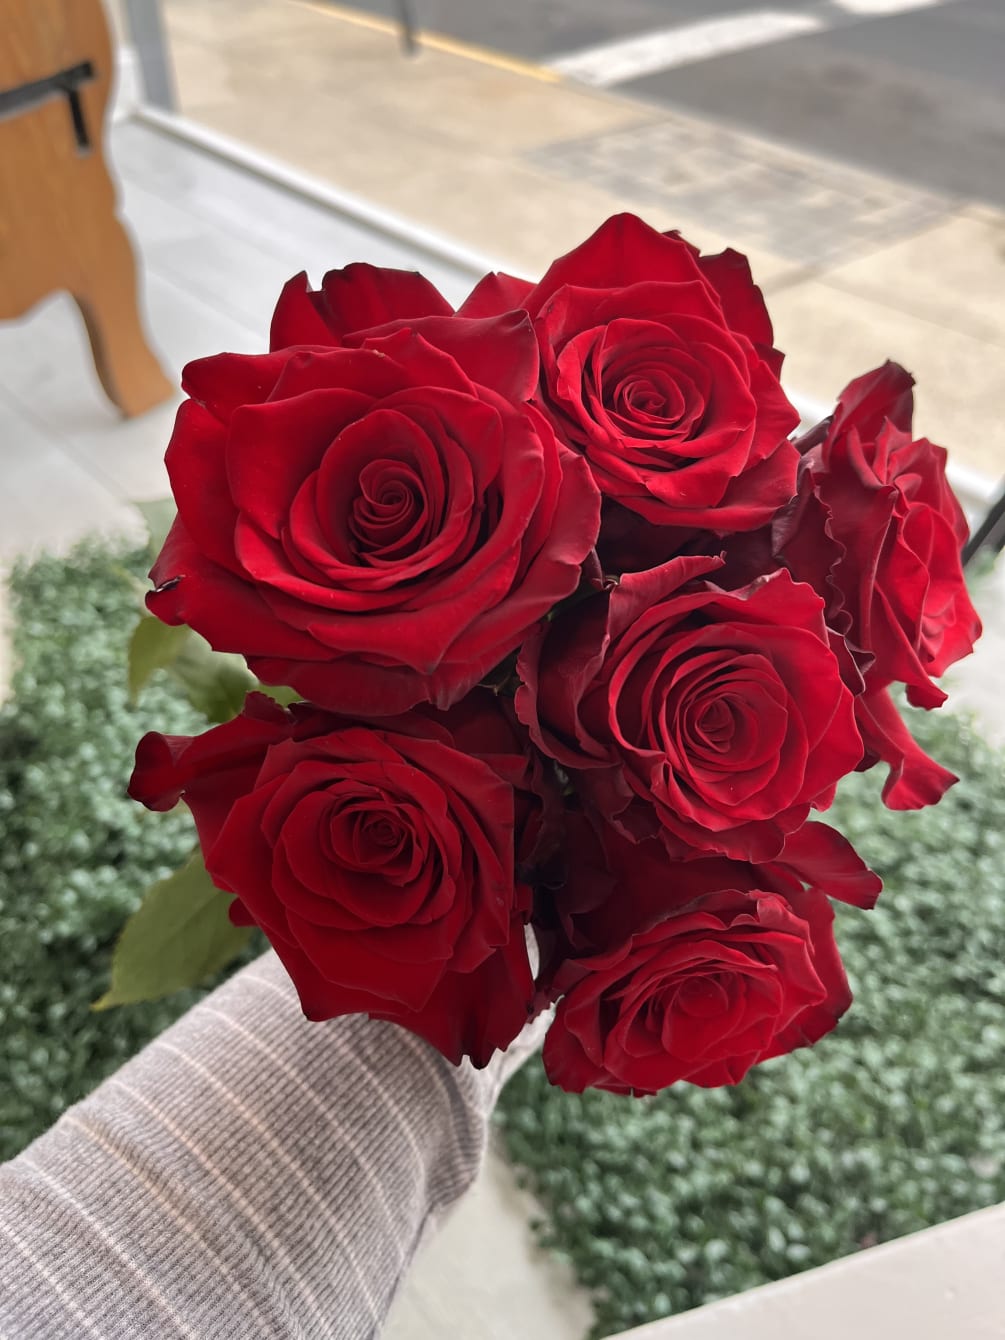 6 red roses arranged in a handheld bouquet, finished with fresh greenery